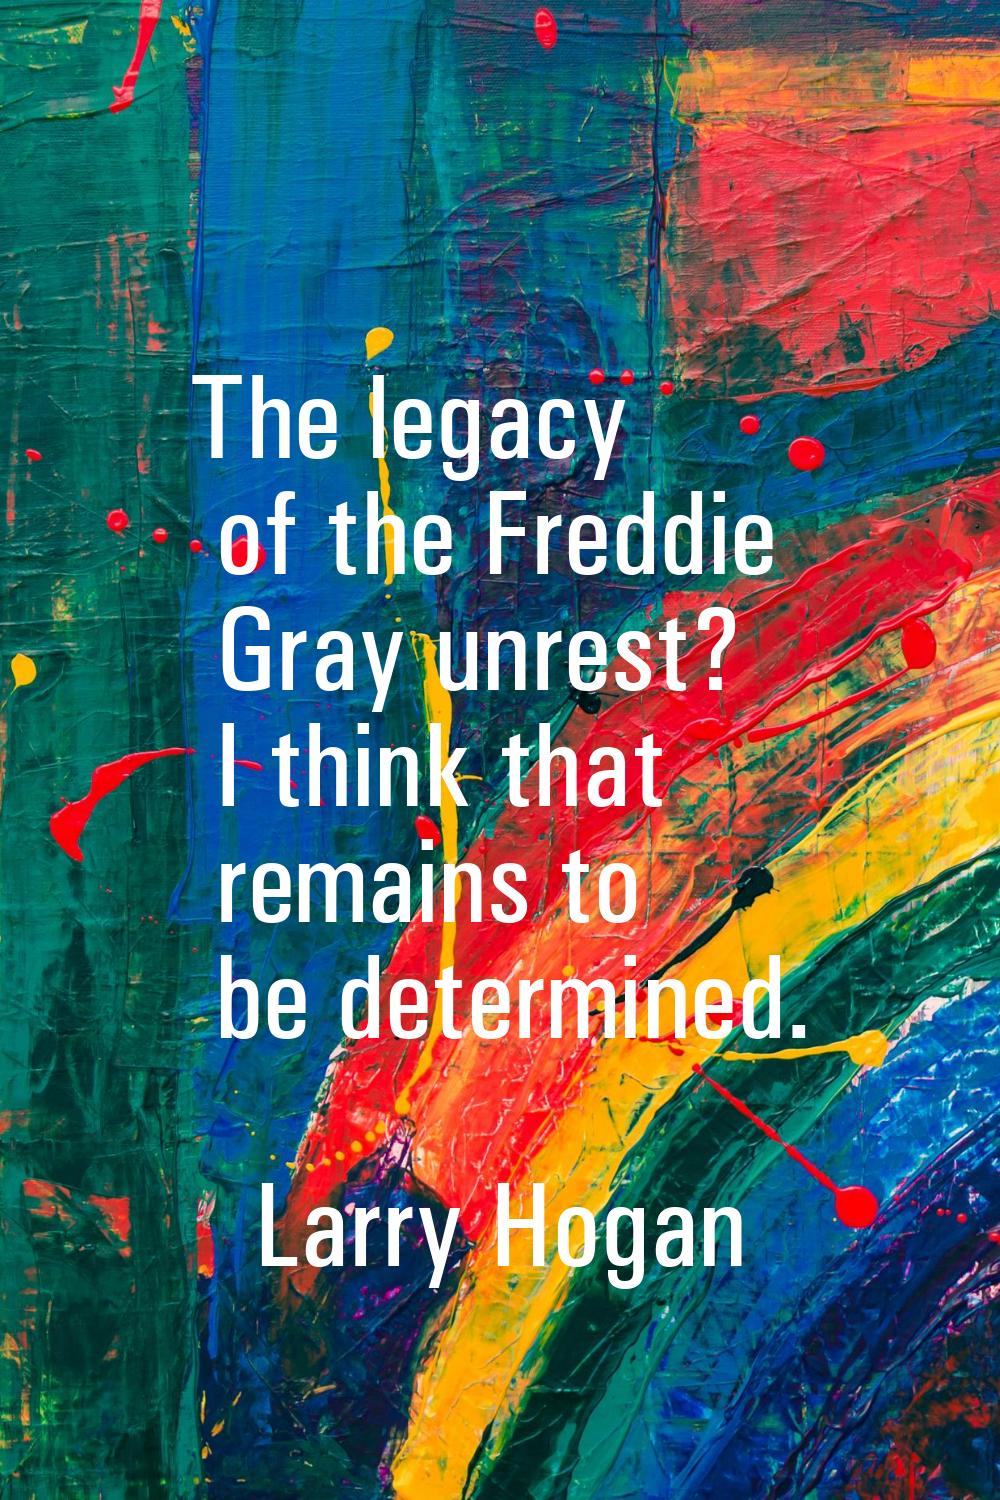 The legacy of the Freddie Gray unrest? I think that remains to be determined.